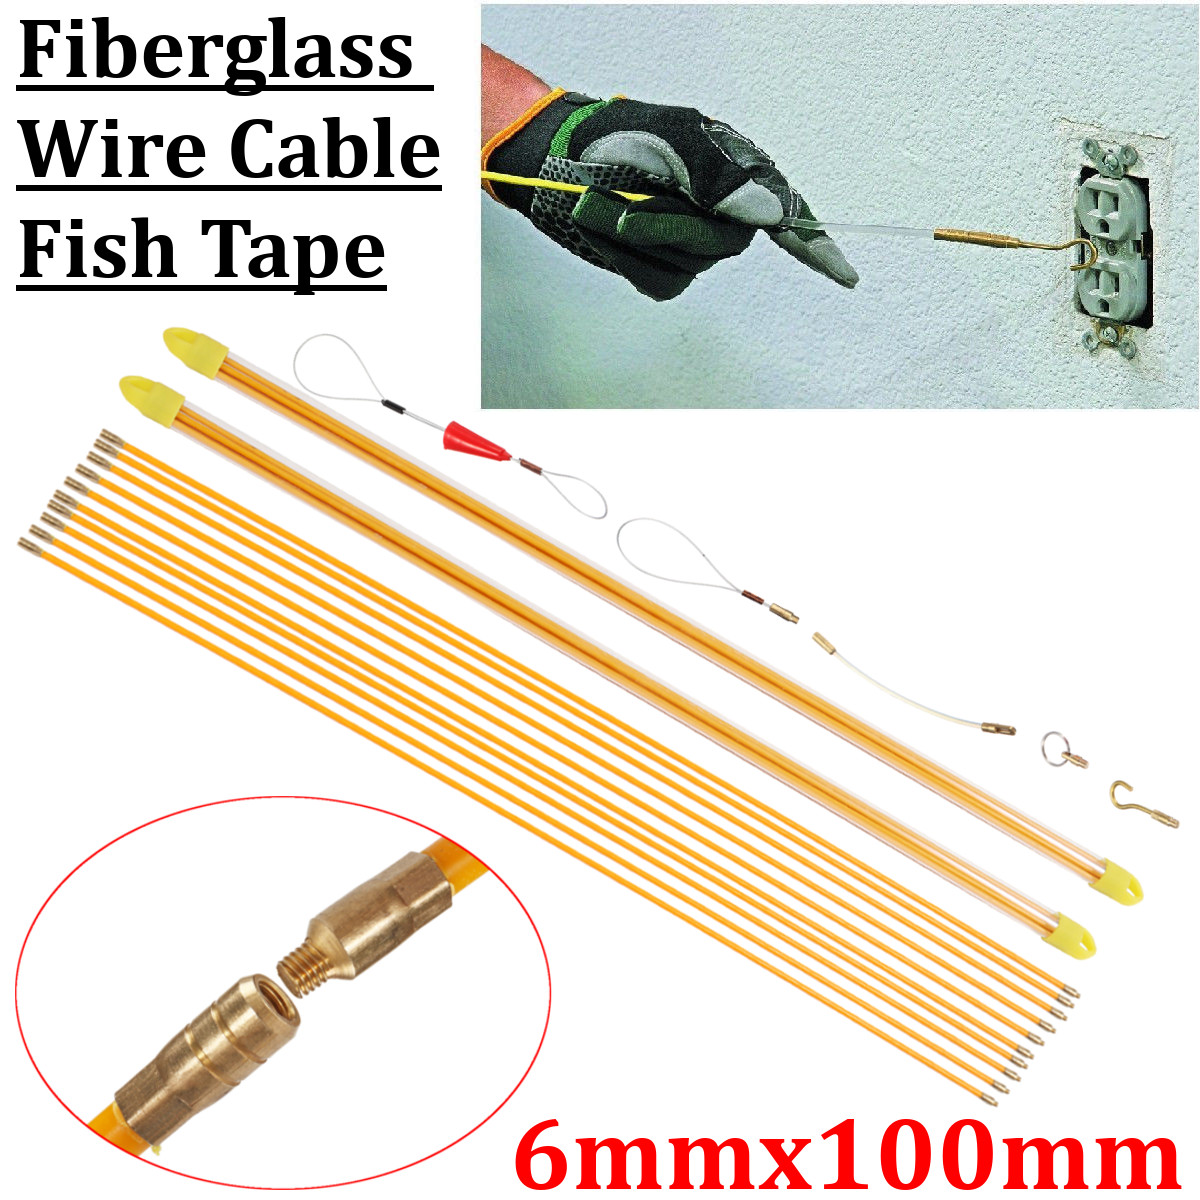 10Pcs-6mm-1M-Fiberglass-Wire-Cable-Puller-Rod-Electrician-Push-Puller-Duct-Fish-Tape-1364104-1